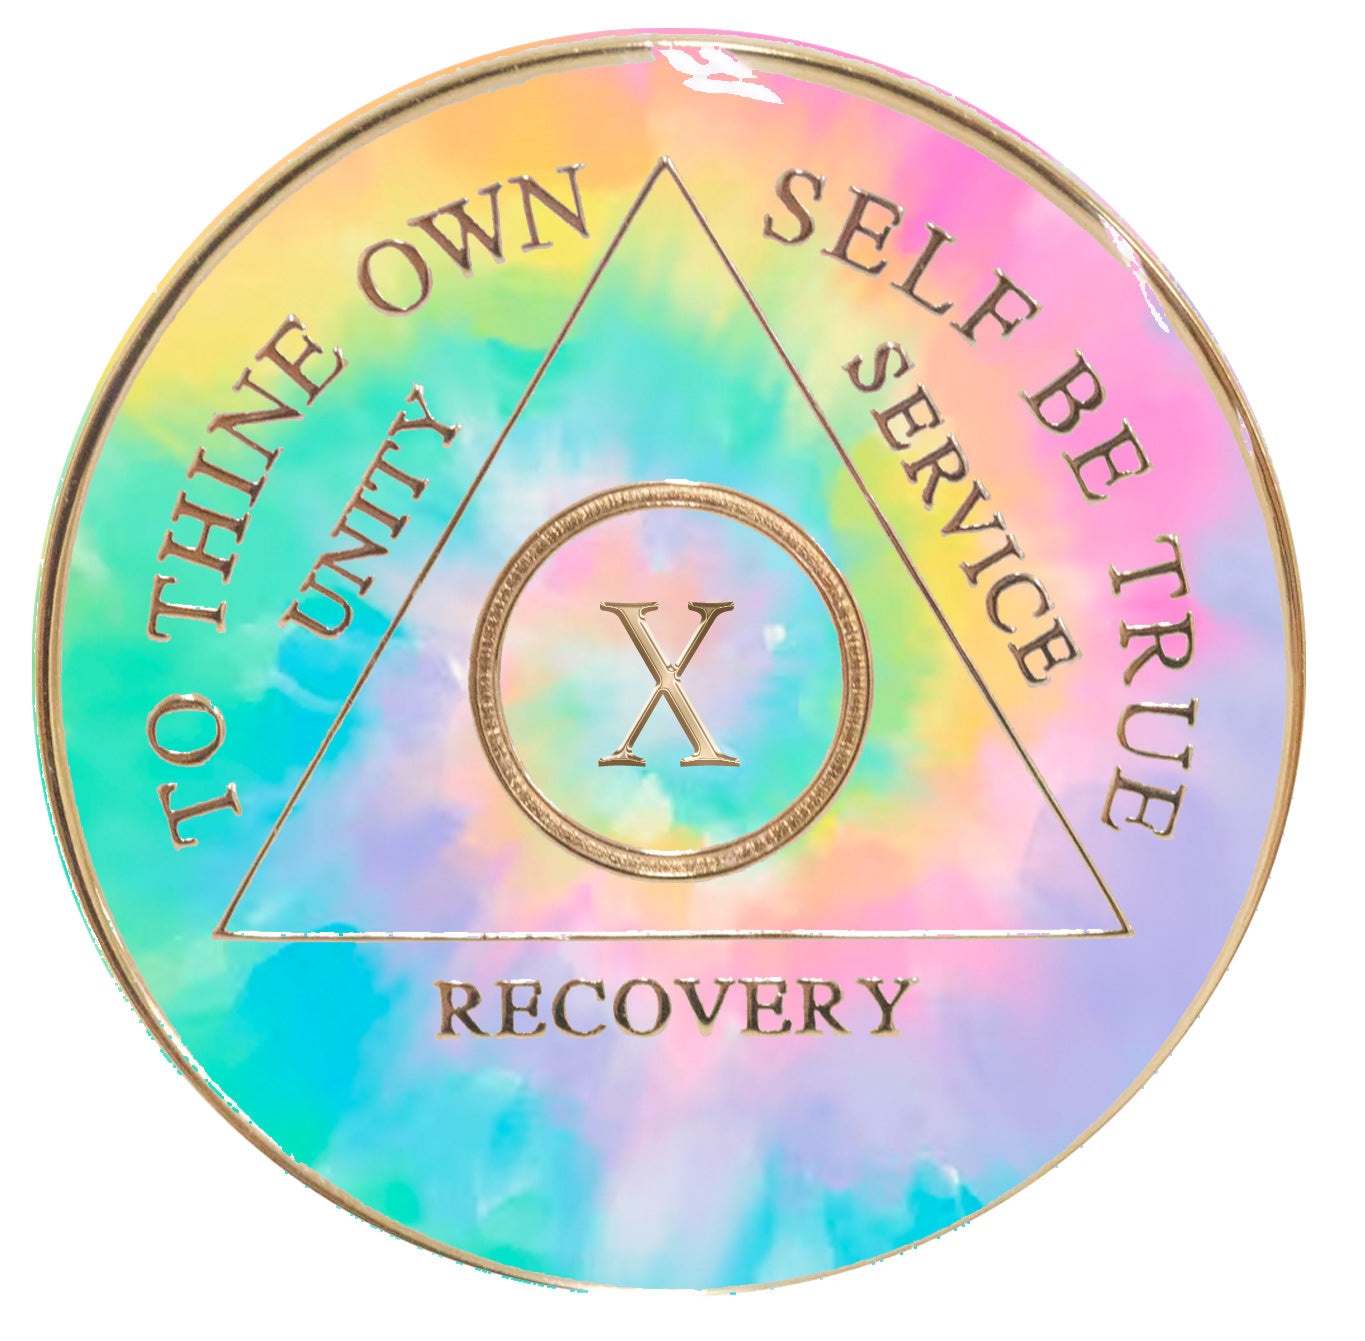 10 year AA psychic-delic change medallion is tie-dye in soft pink, yellow, purple, and blues with the circle, triangle, roman numeral, unity, service, recovery, and to thine own self be true embossed in 14k gold, and the tie-dye representing change.